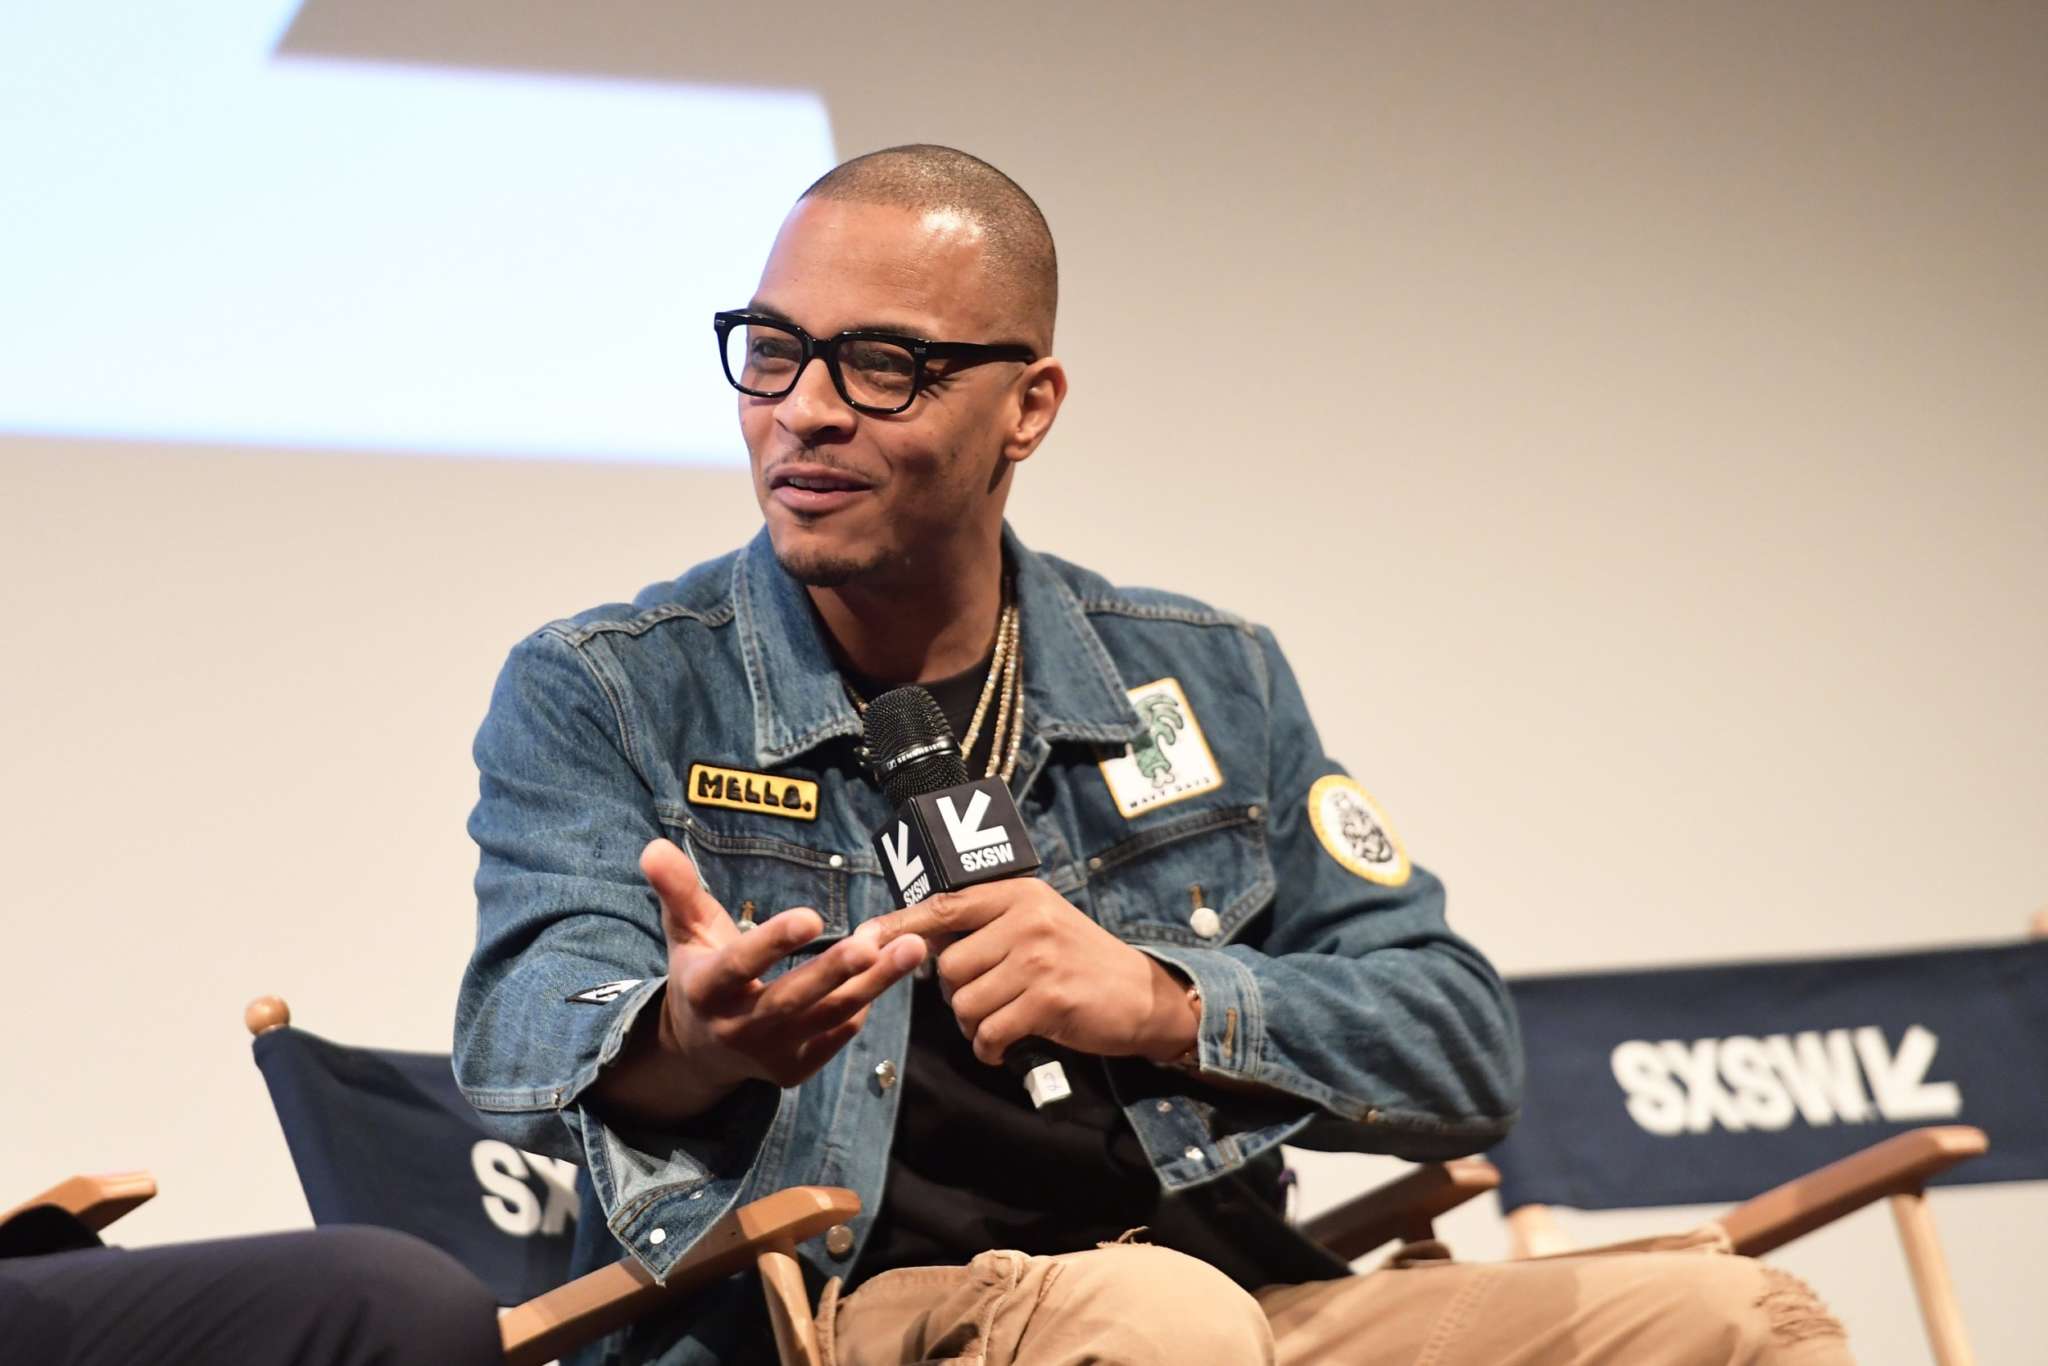 T.I.'s Latest Video Triggers A Debate Among Fans - Check Out The Post He Shared